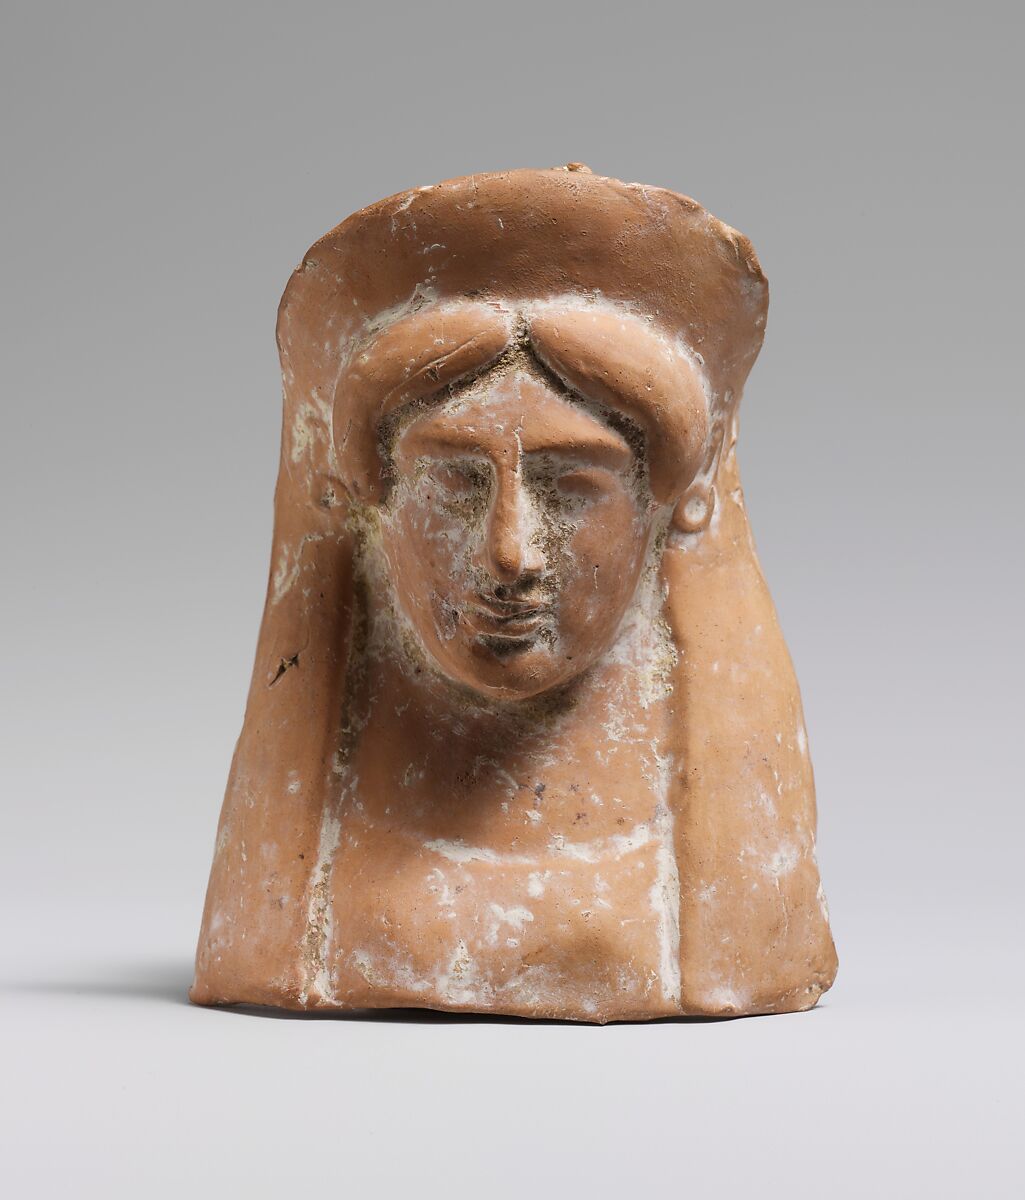 Terracotta relief with the head and neck of a woman, Terracotta, Greek, probably Rhodian 